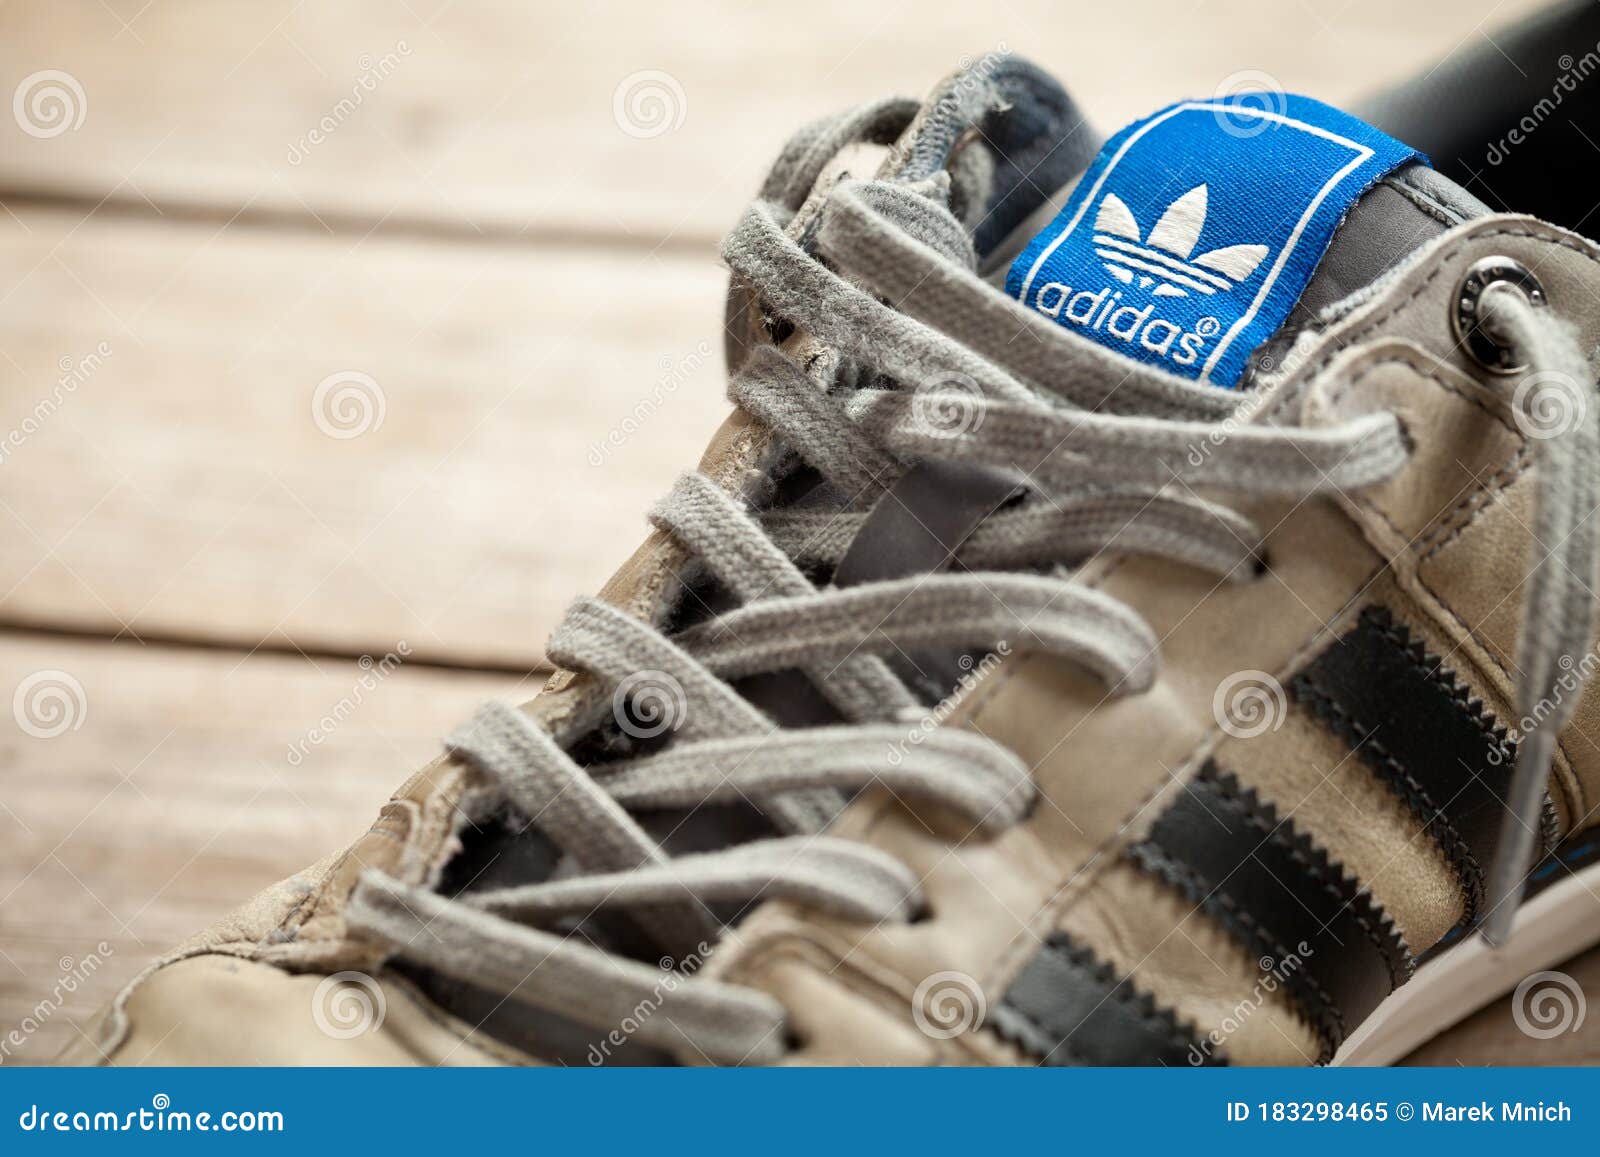 stock adidas shoes